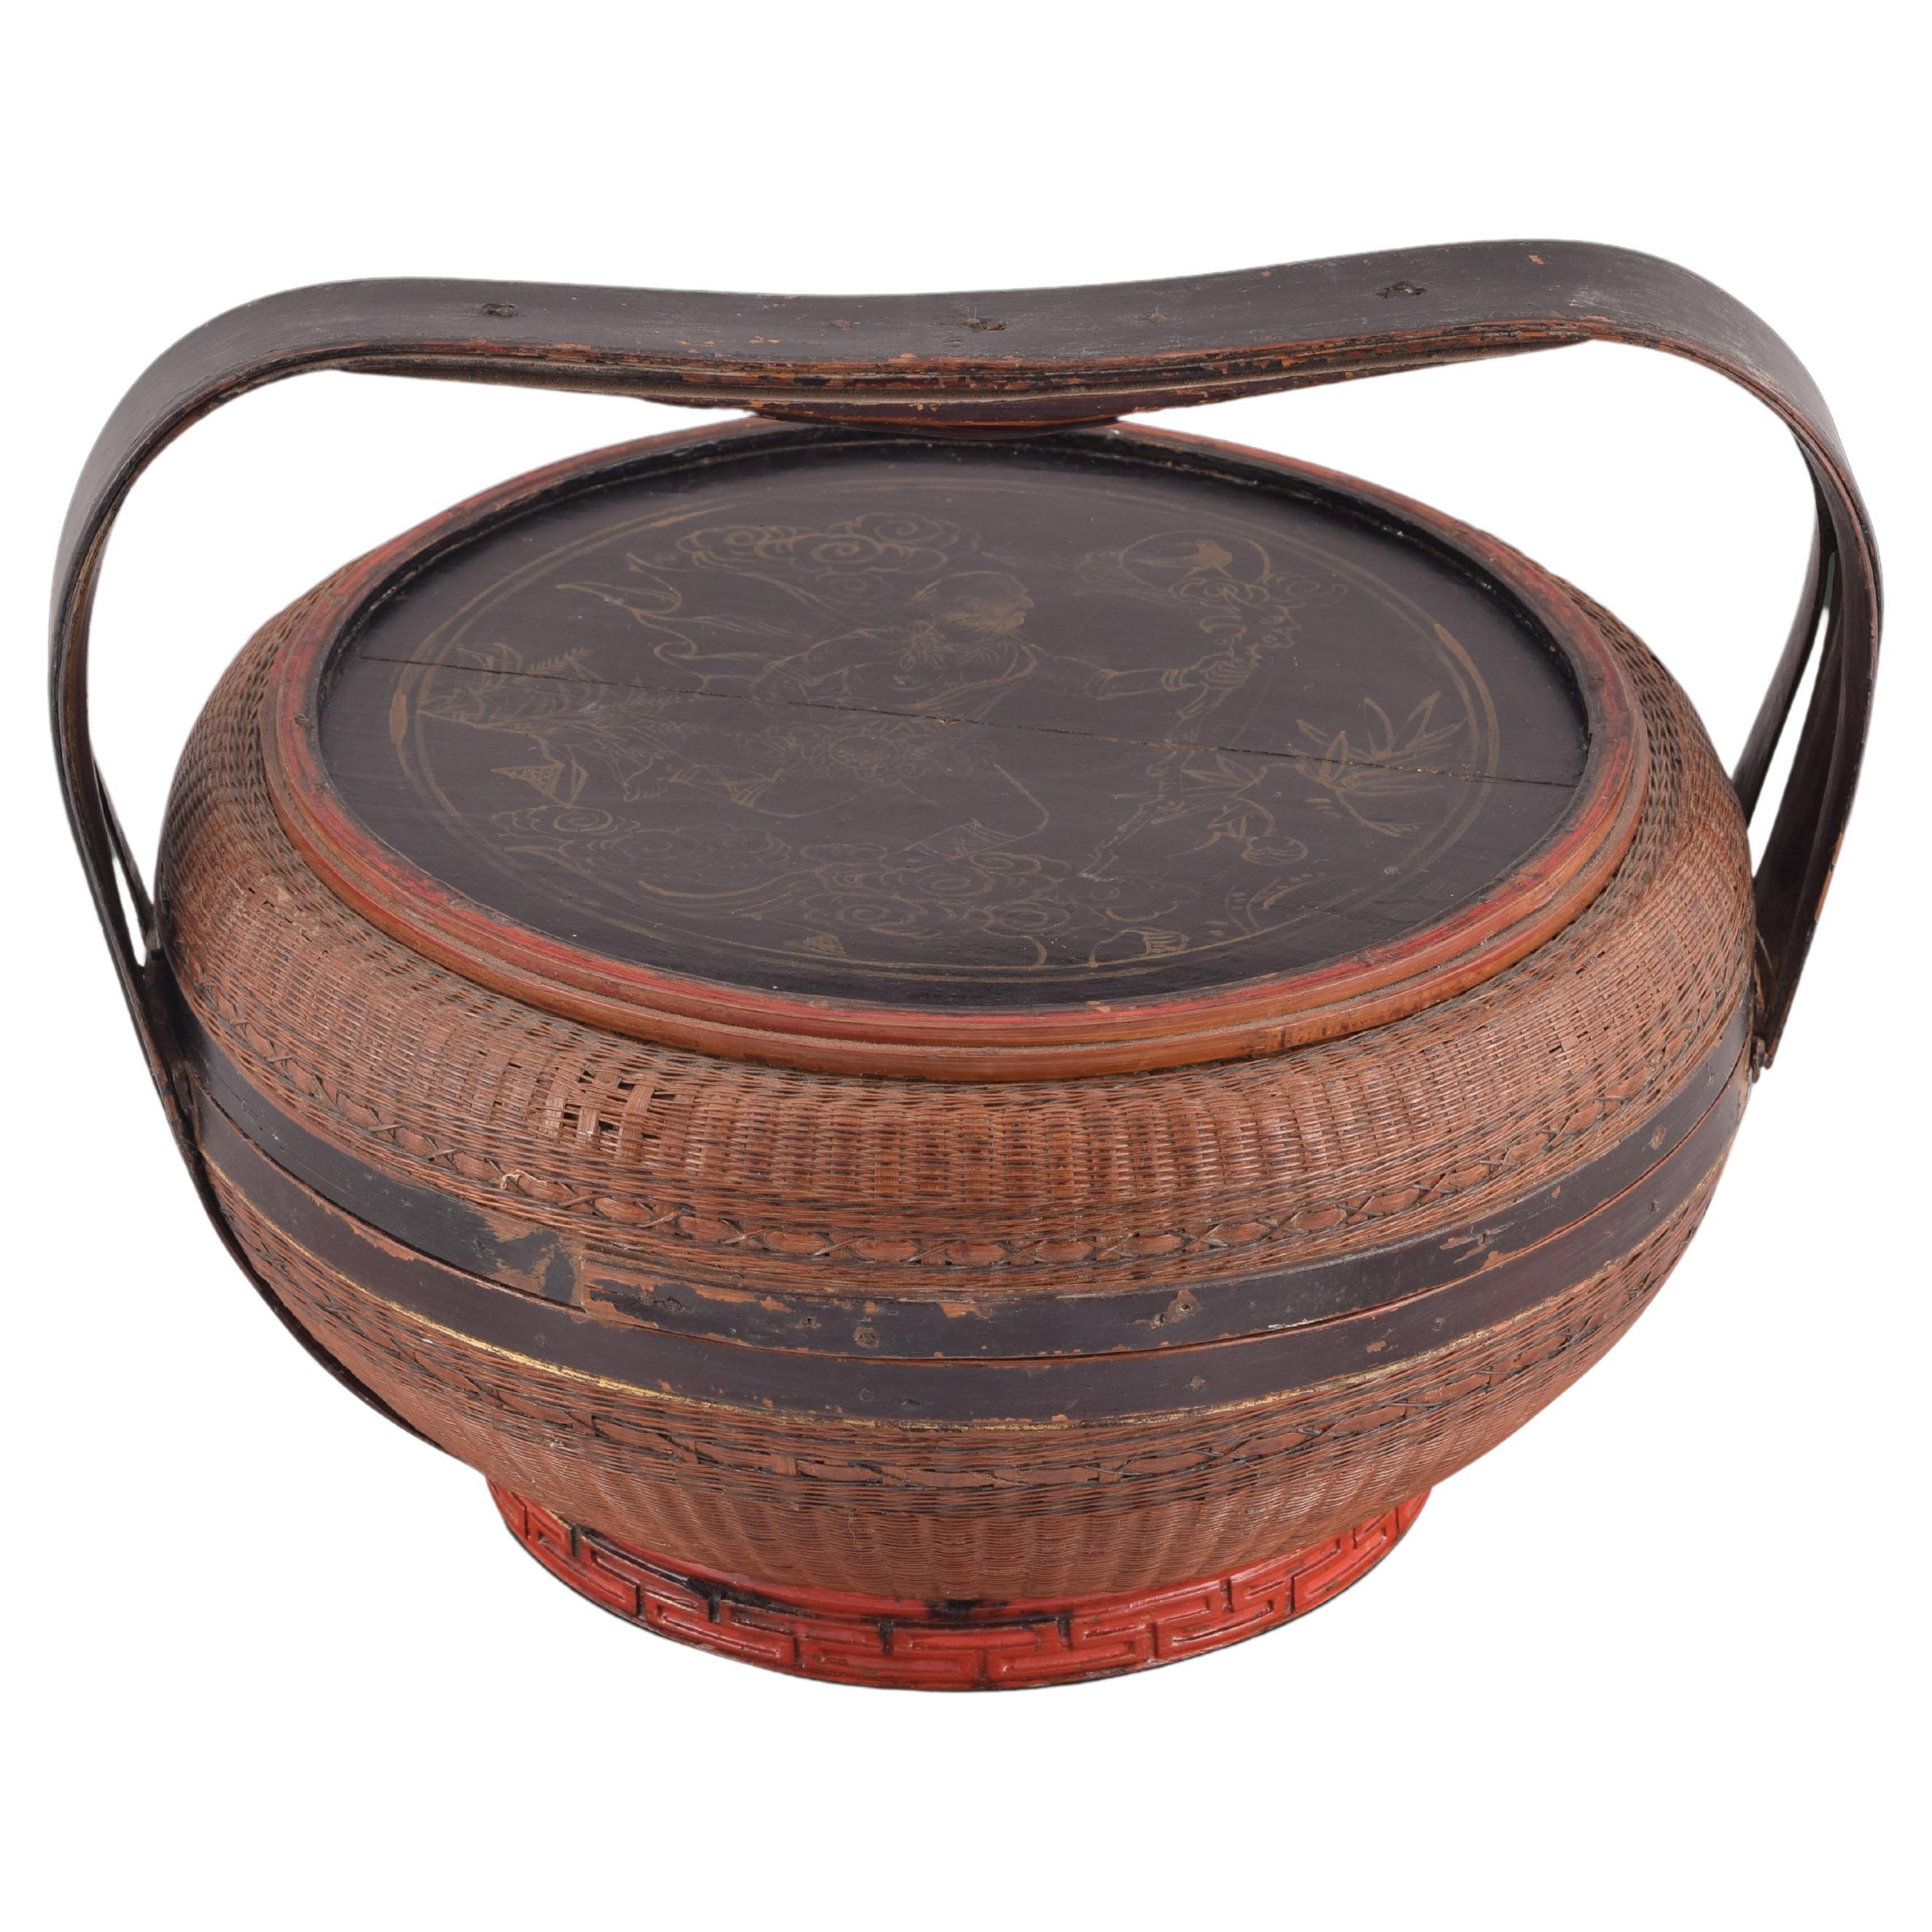 Handmade basket. Vegetable fiber and lacquered wood. China, ca early 20thc. For Sale